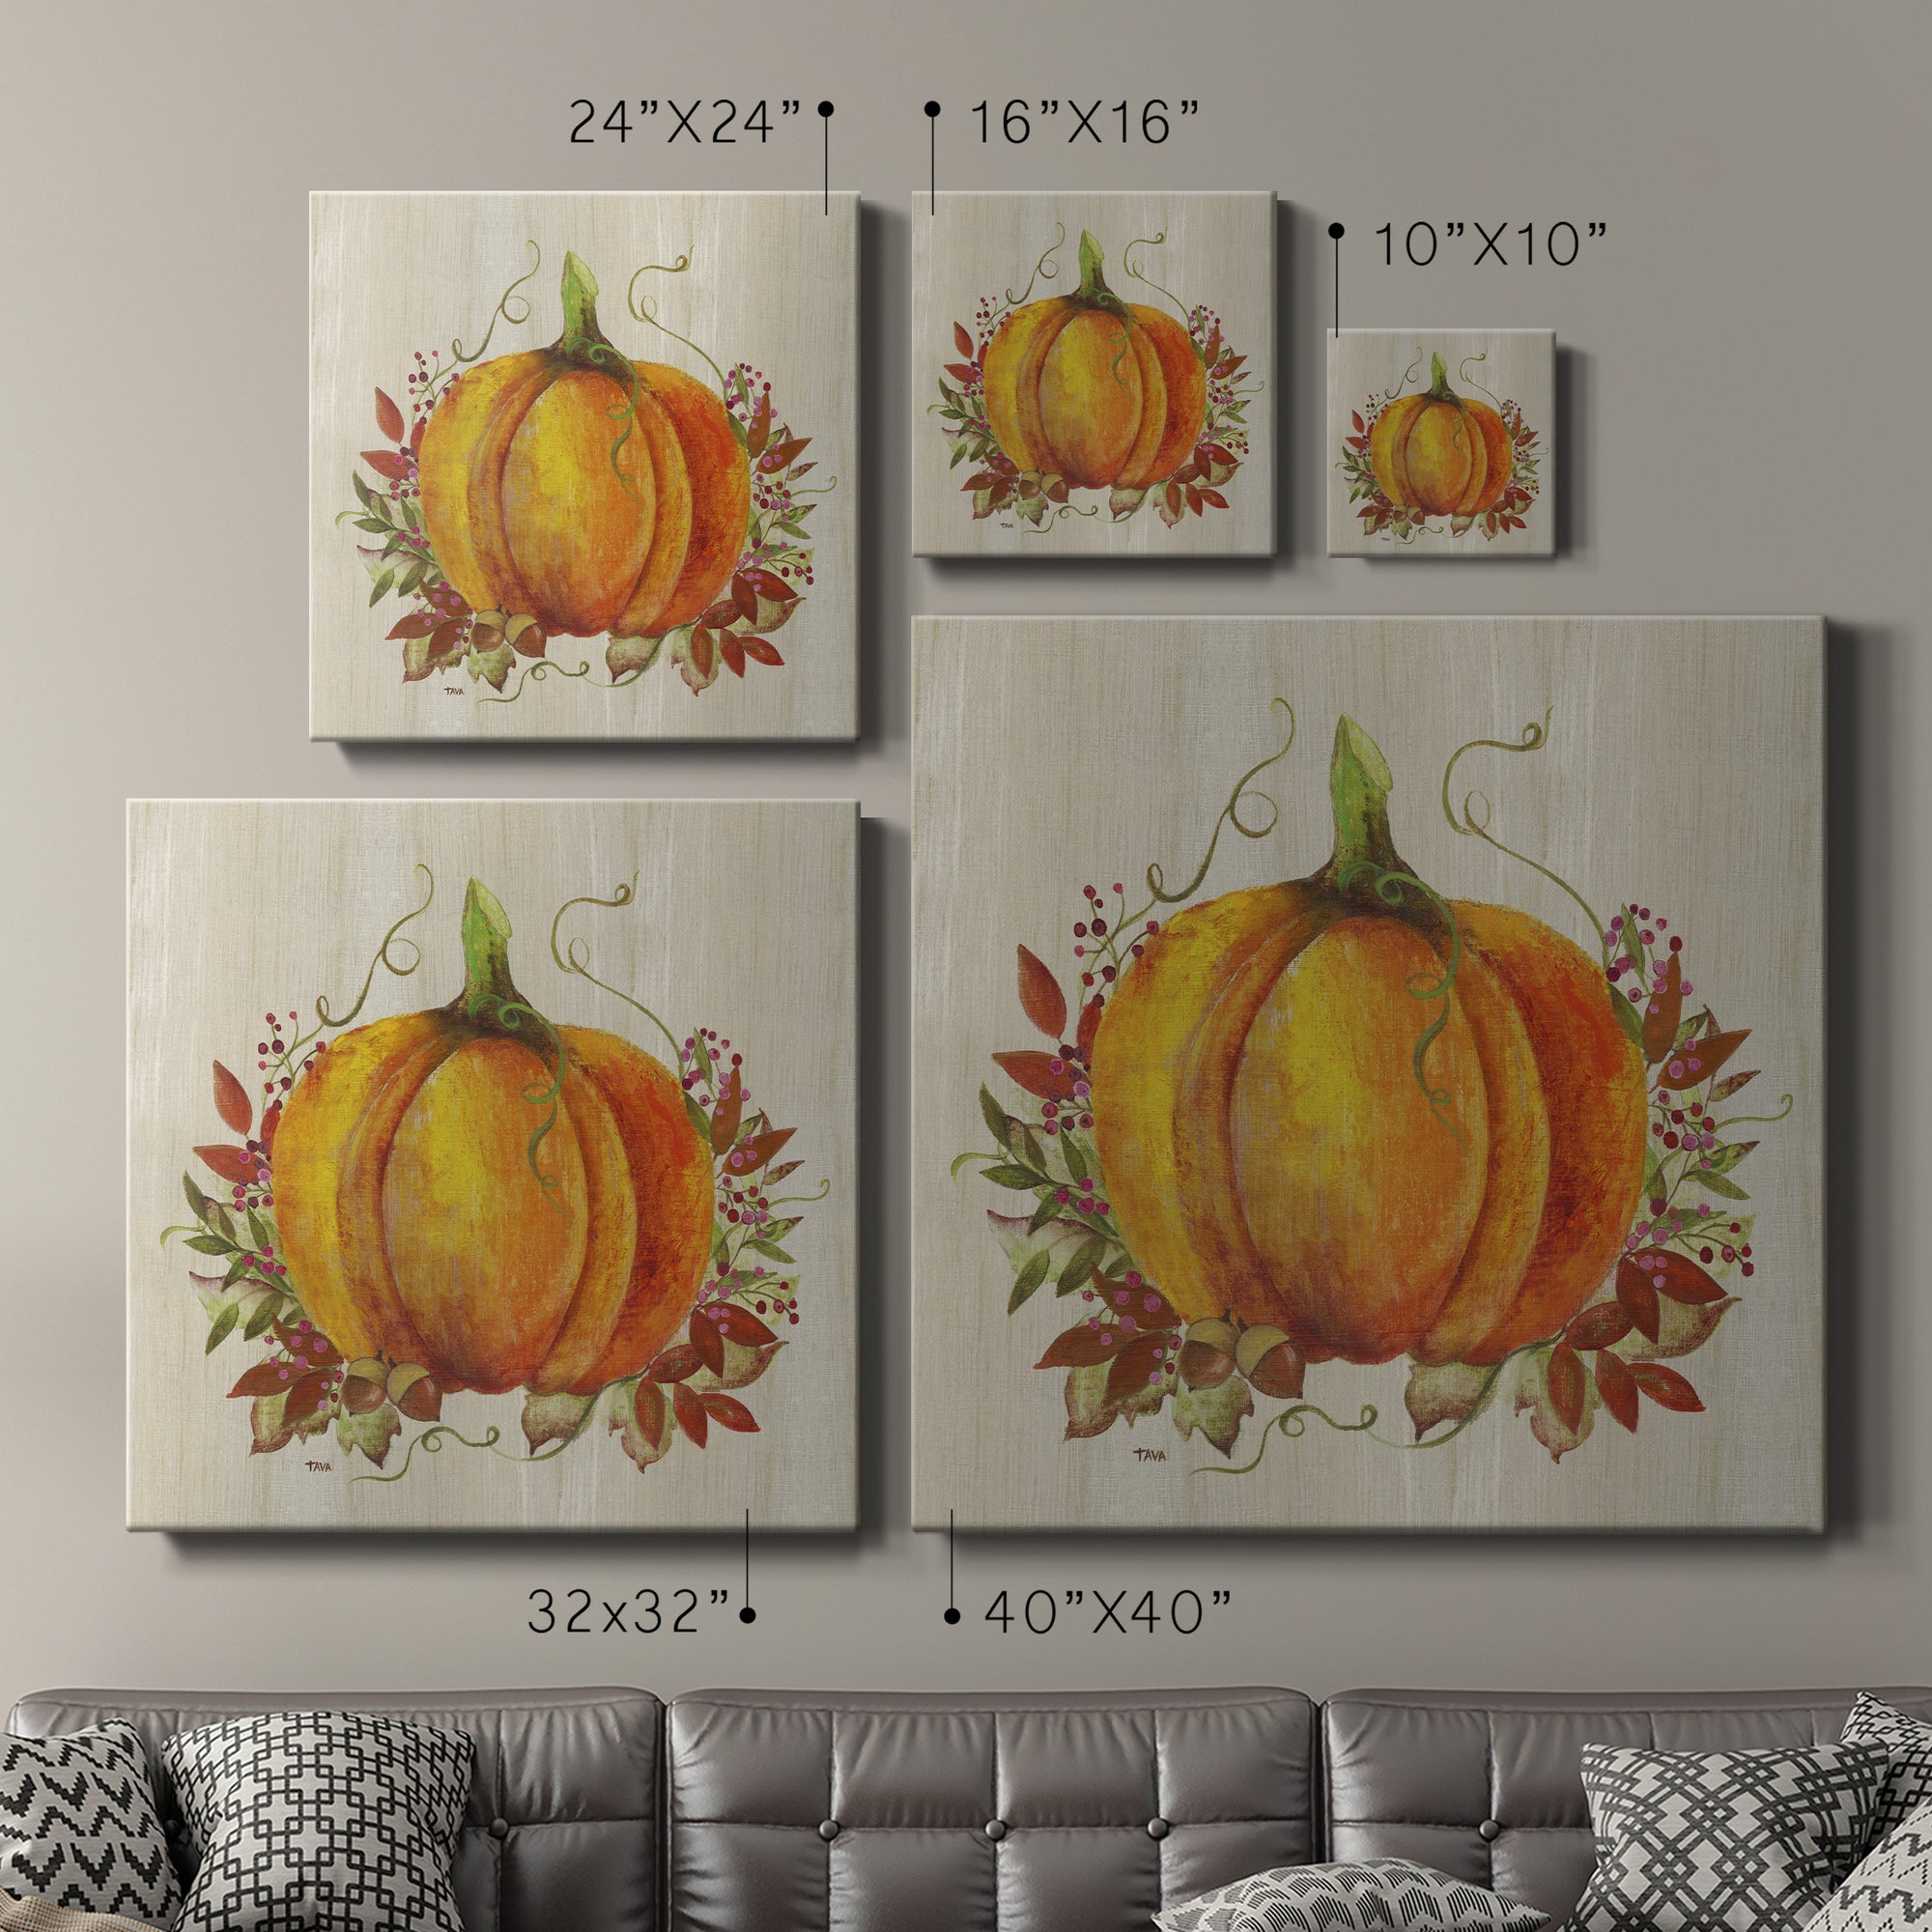 Fall Pumpkin with Leaves-Premium Gallery Wrapped Canvas - Ready to Hang